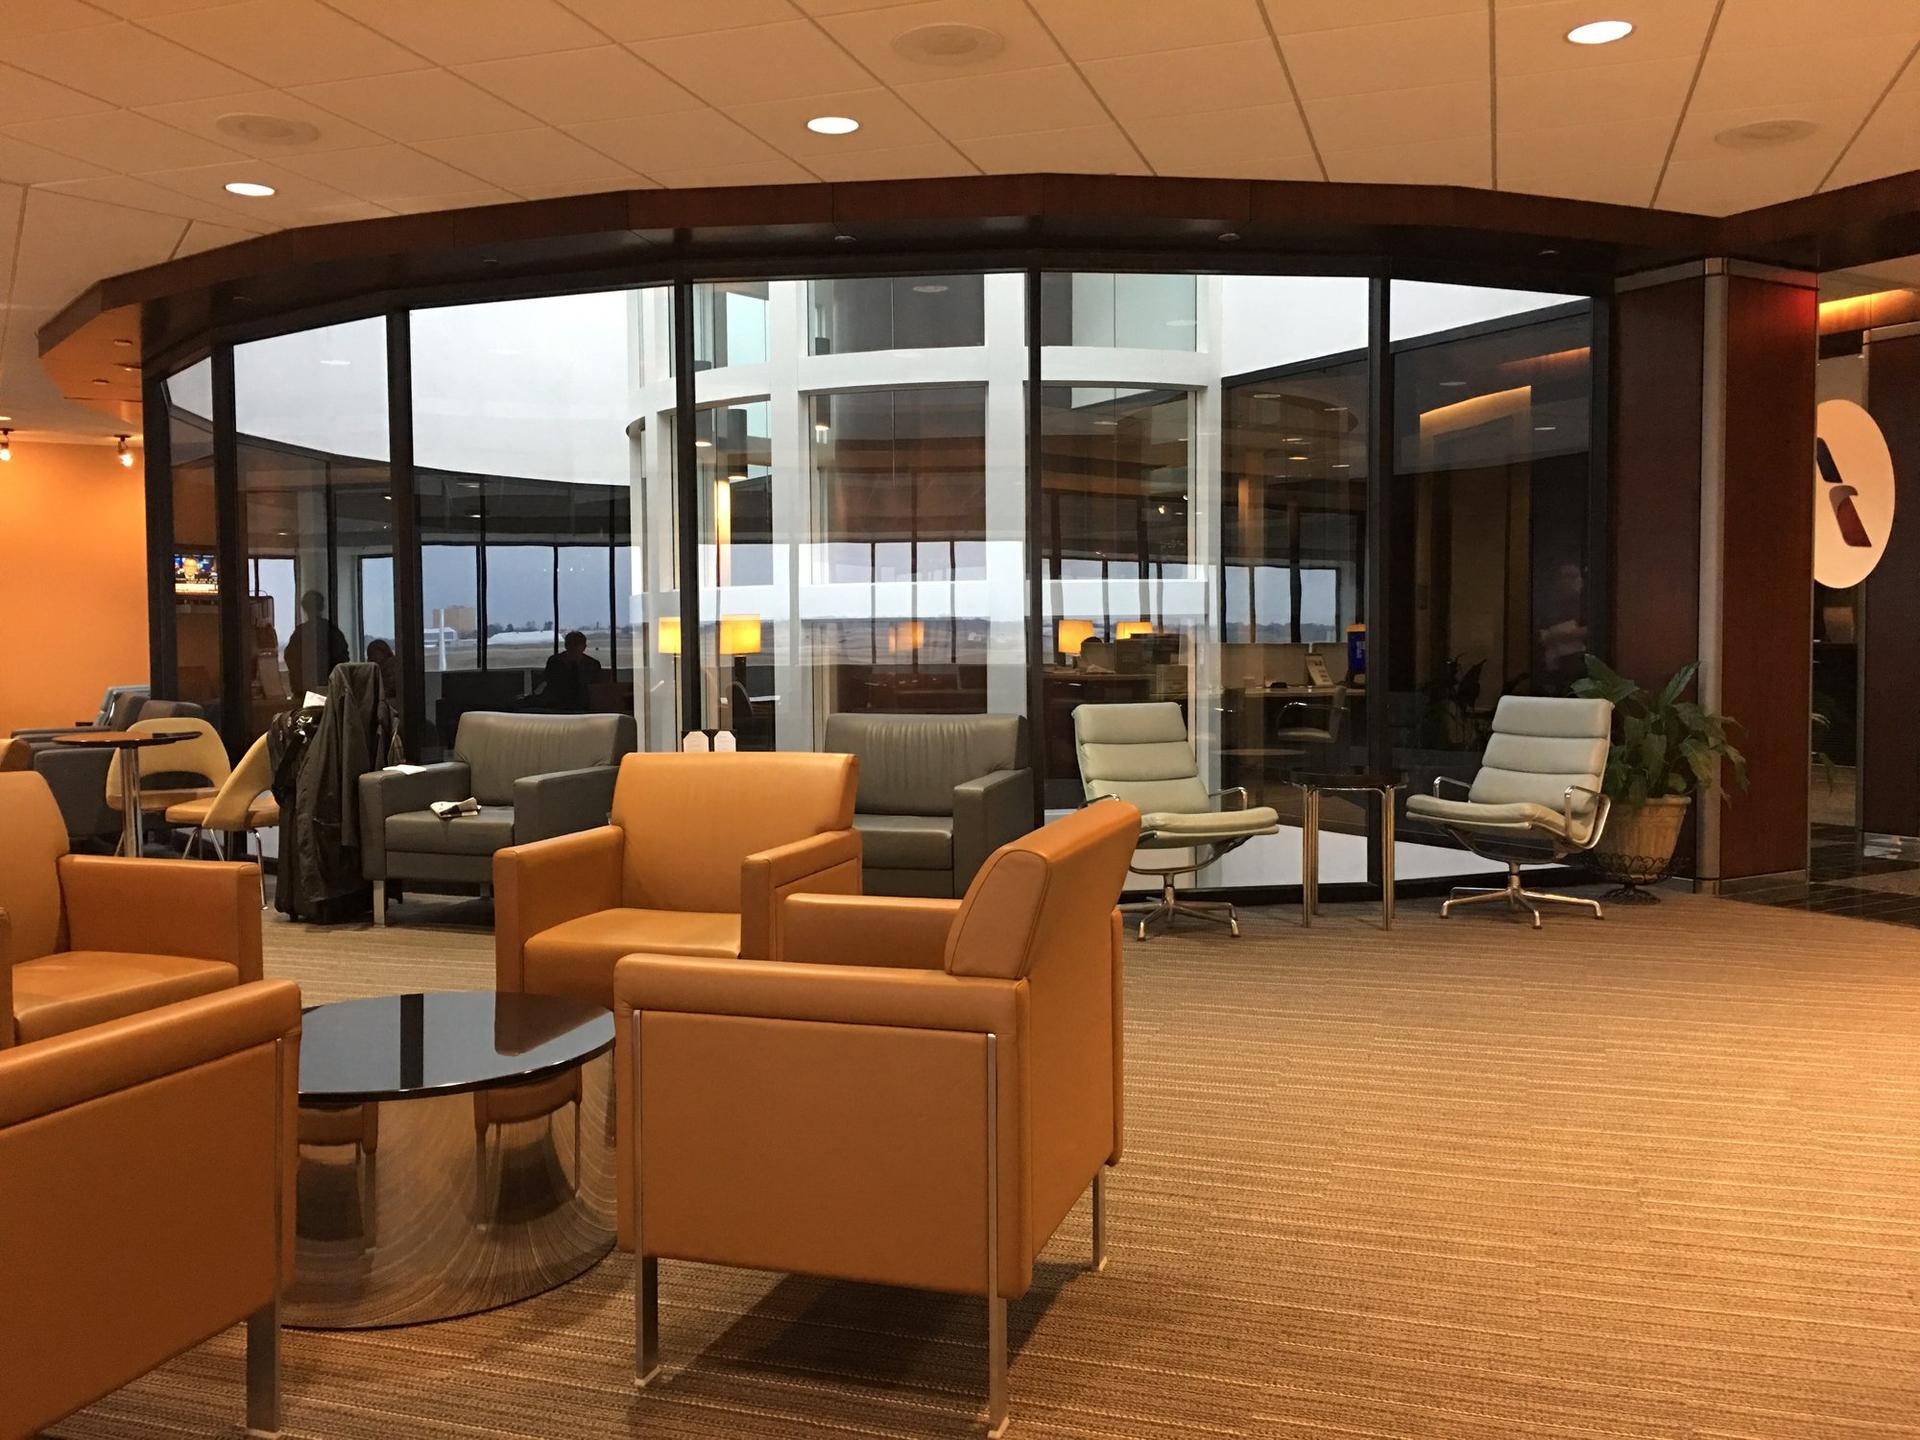 American Airlines Admirals Club image 4 of 16